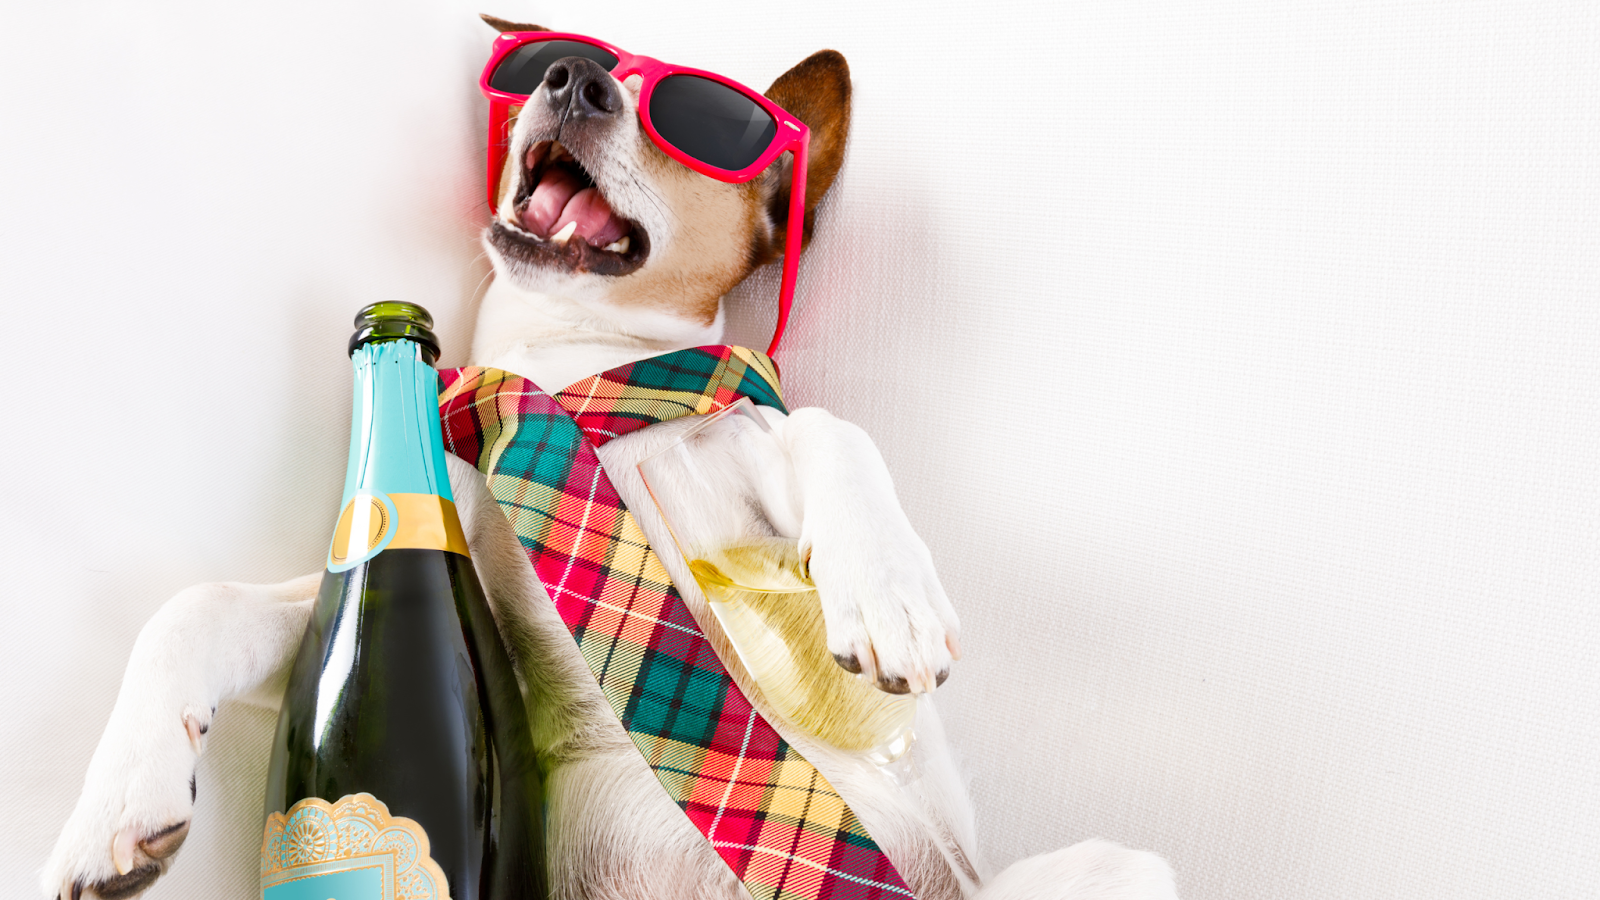 Alcohol can be very dangerous to pets and can lead to alcohol poisoning.